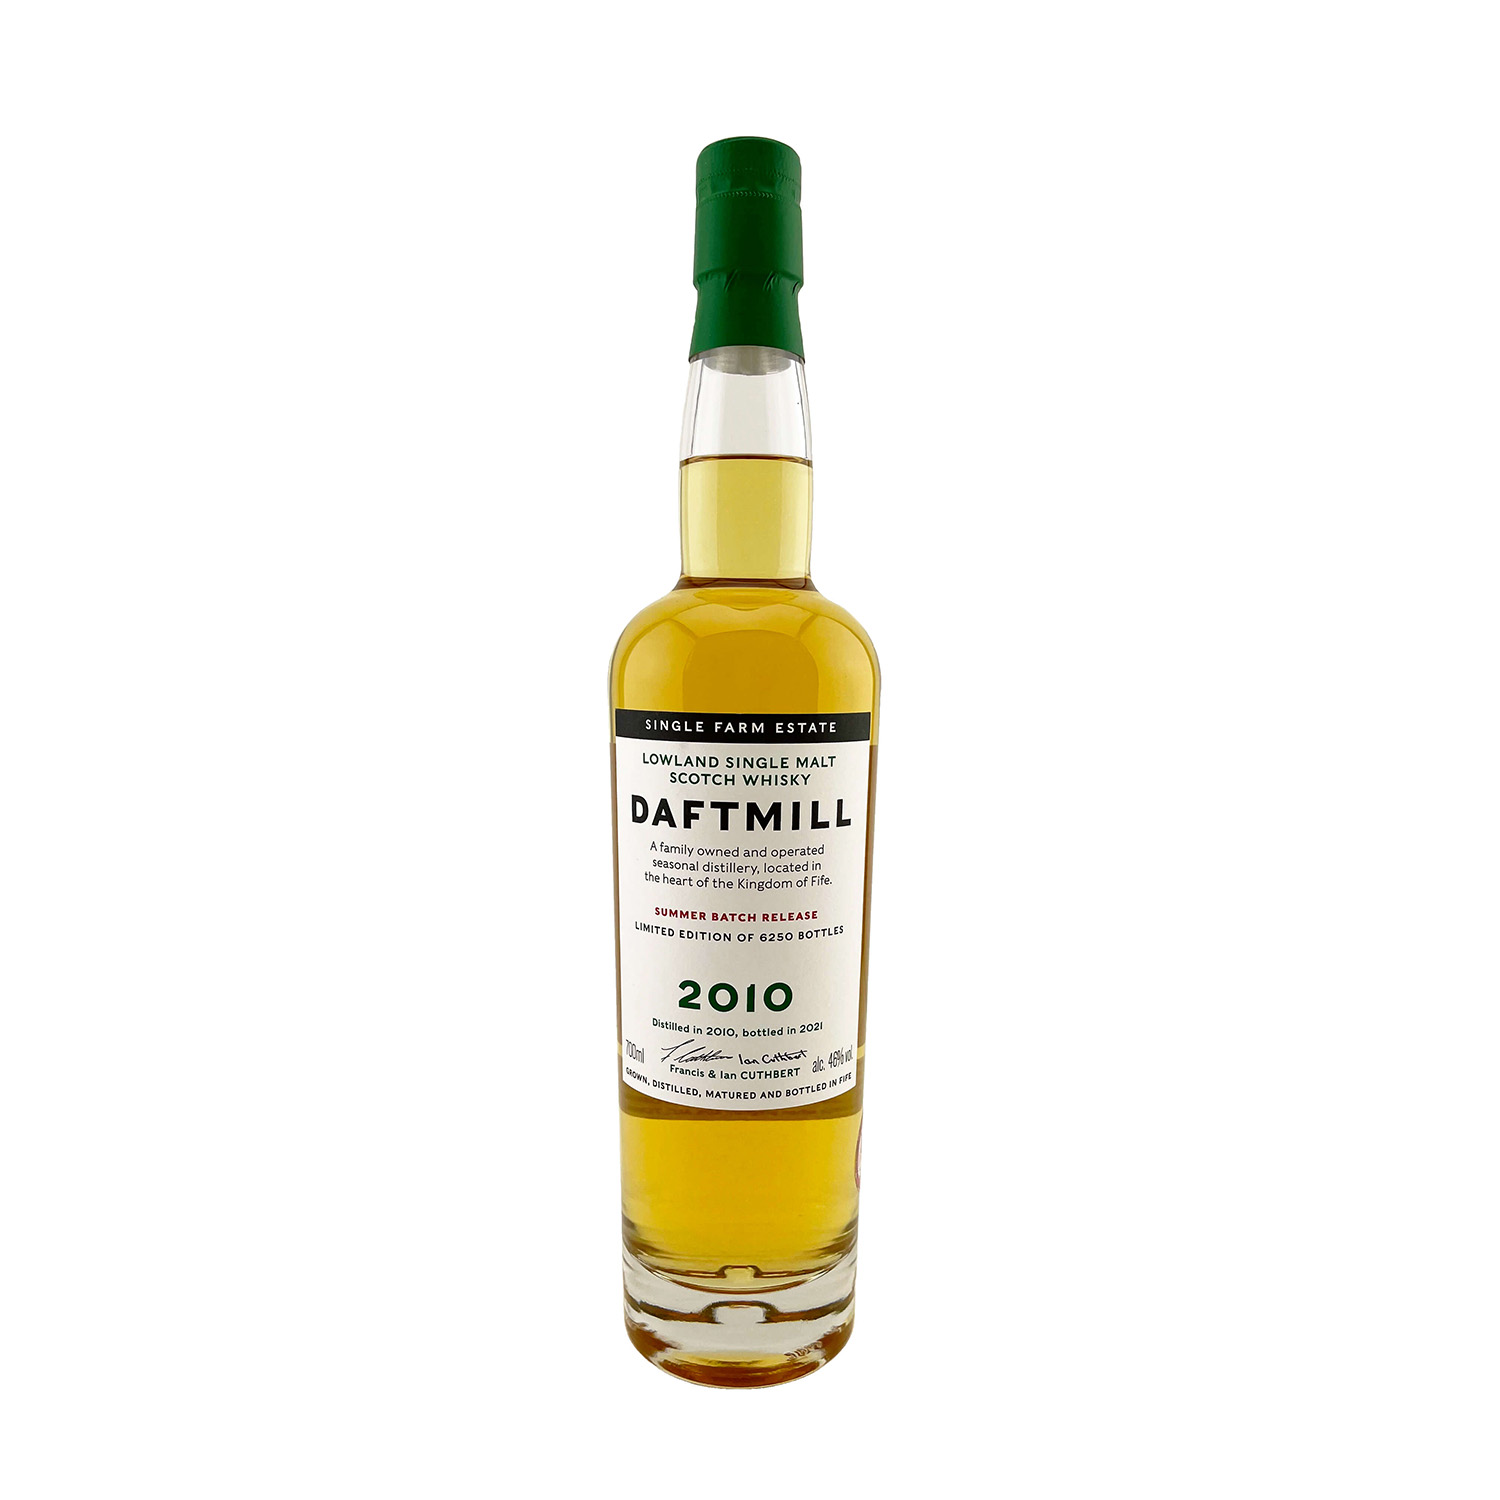 The Daftmill 2010 Summer Batch Release, Scottish Whisky, The Old Barrelhouse